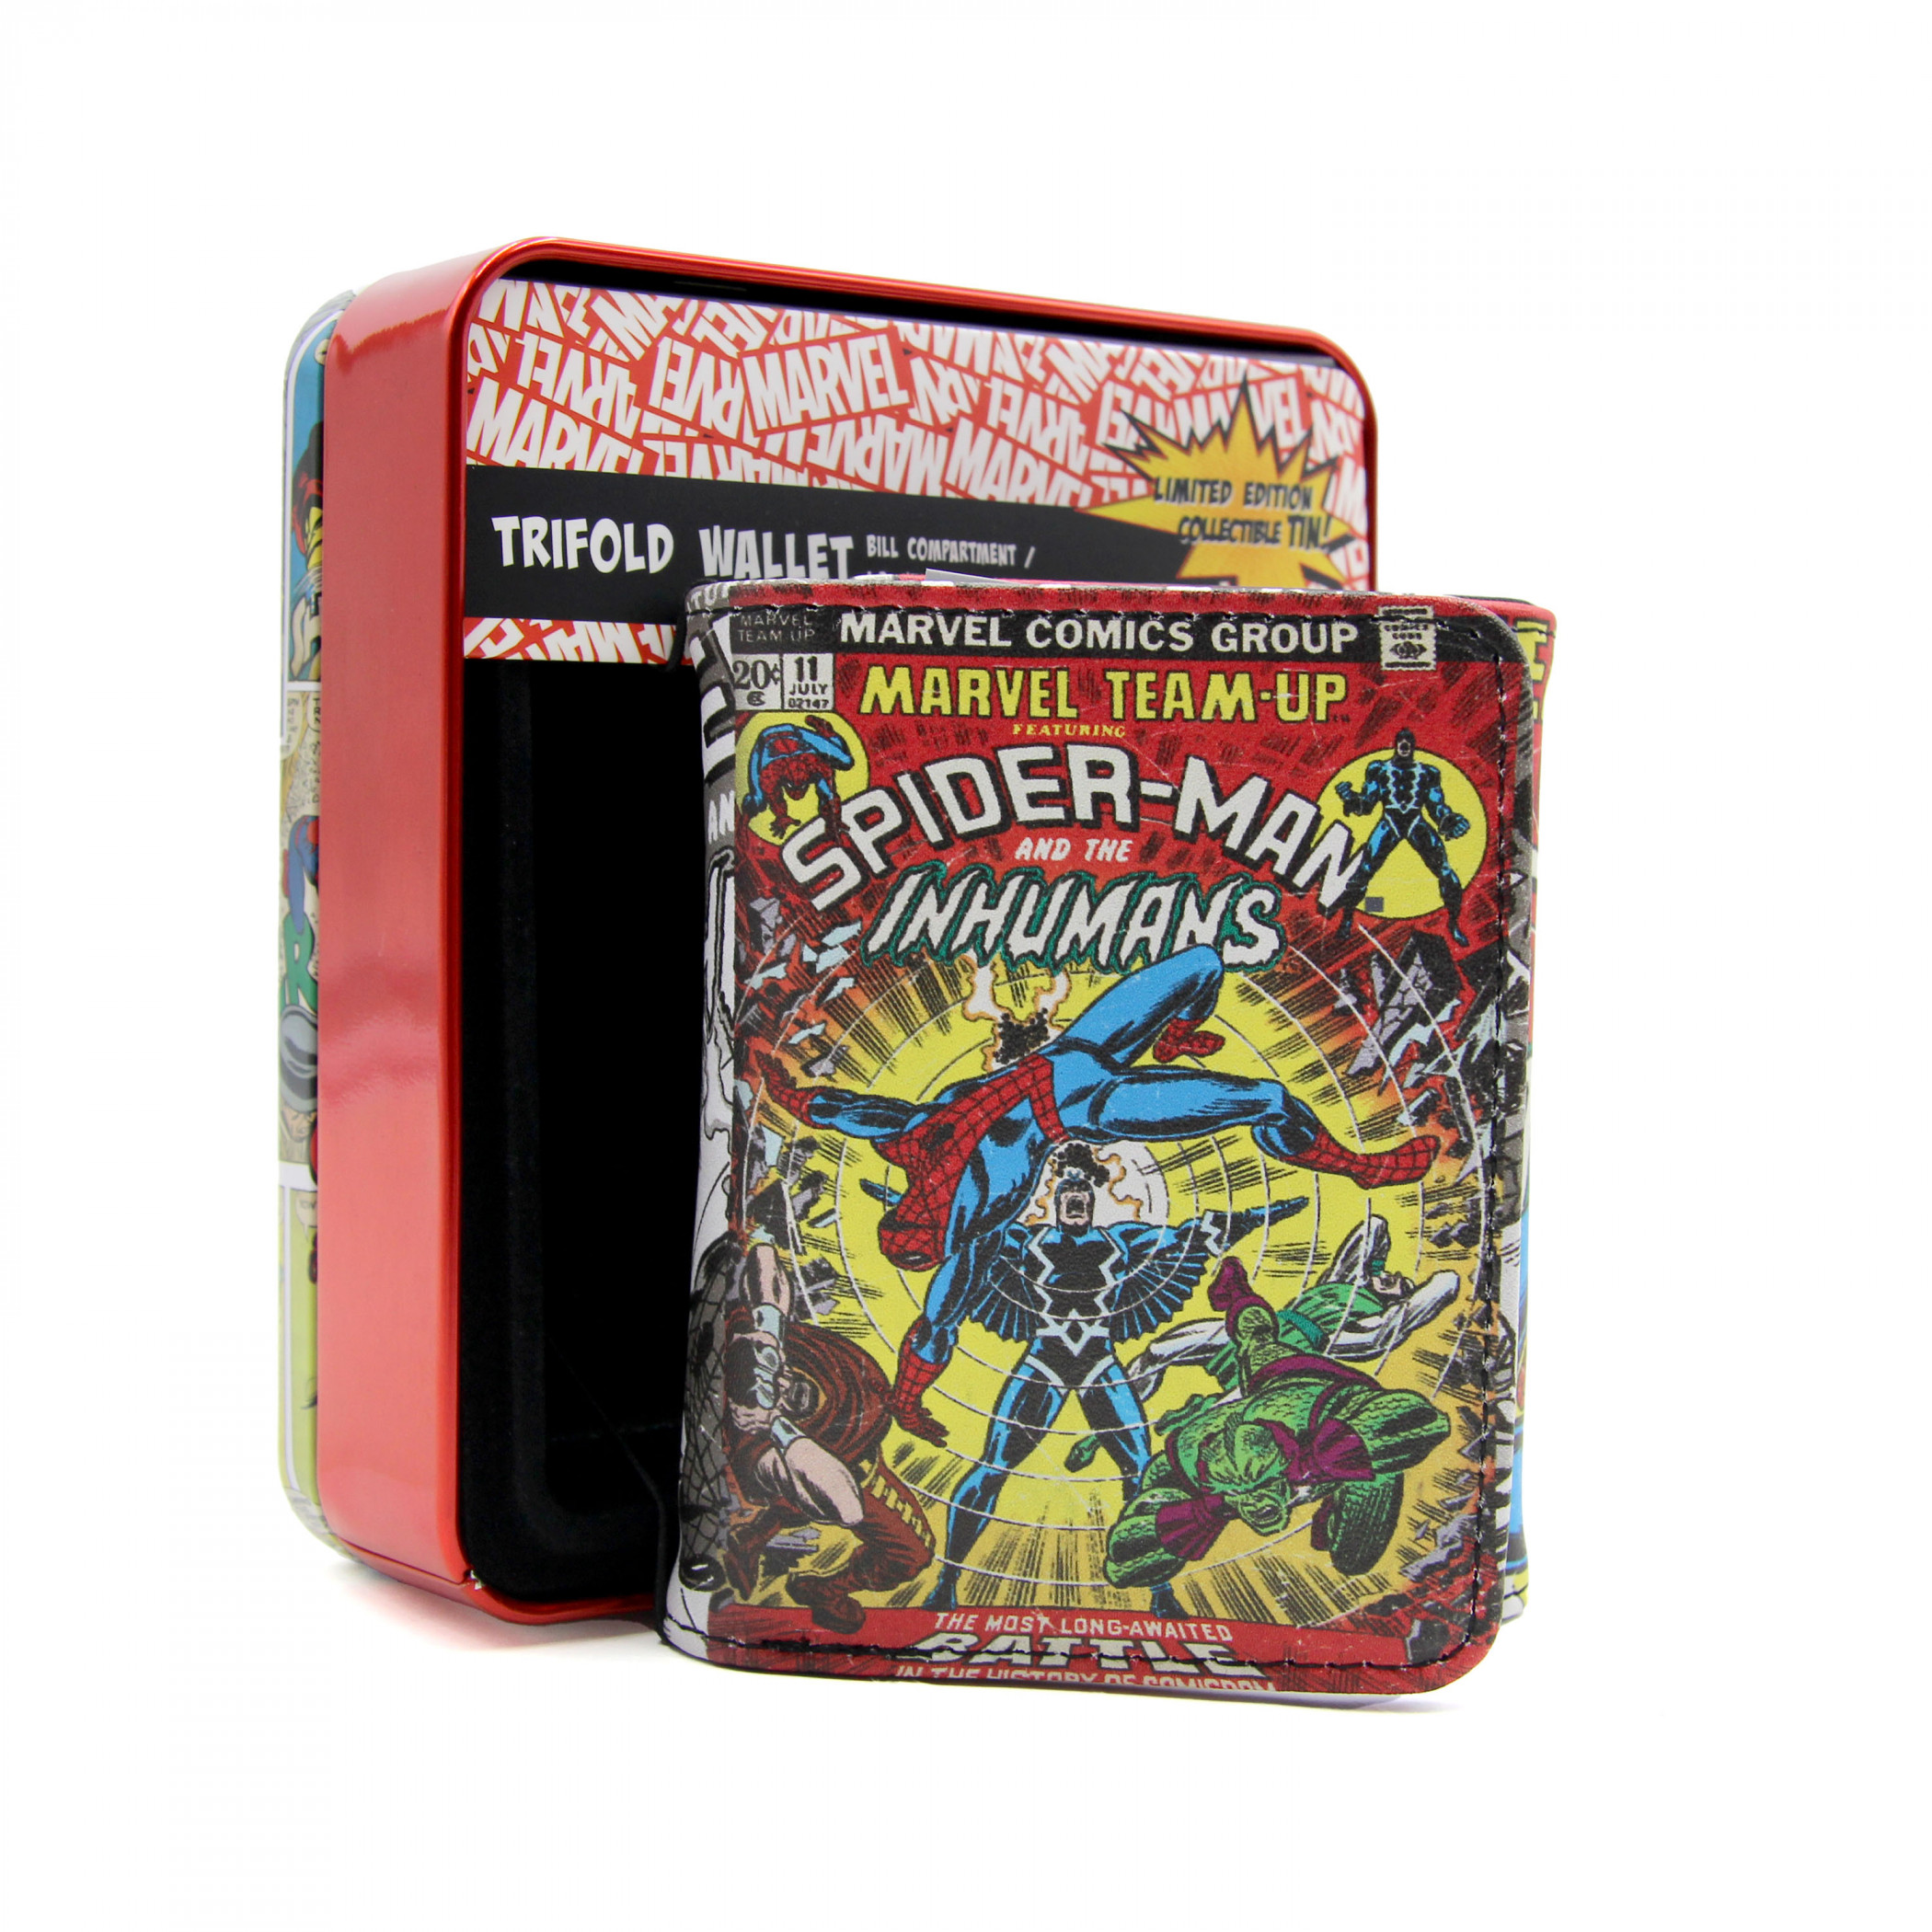 Spider-Man and The Inhumans #11 Cover Trifold Wallet in Collectors Tin